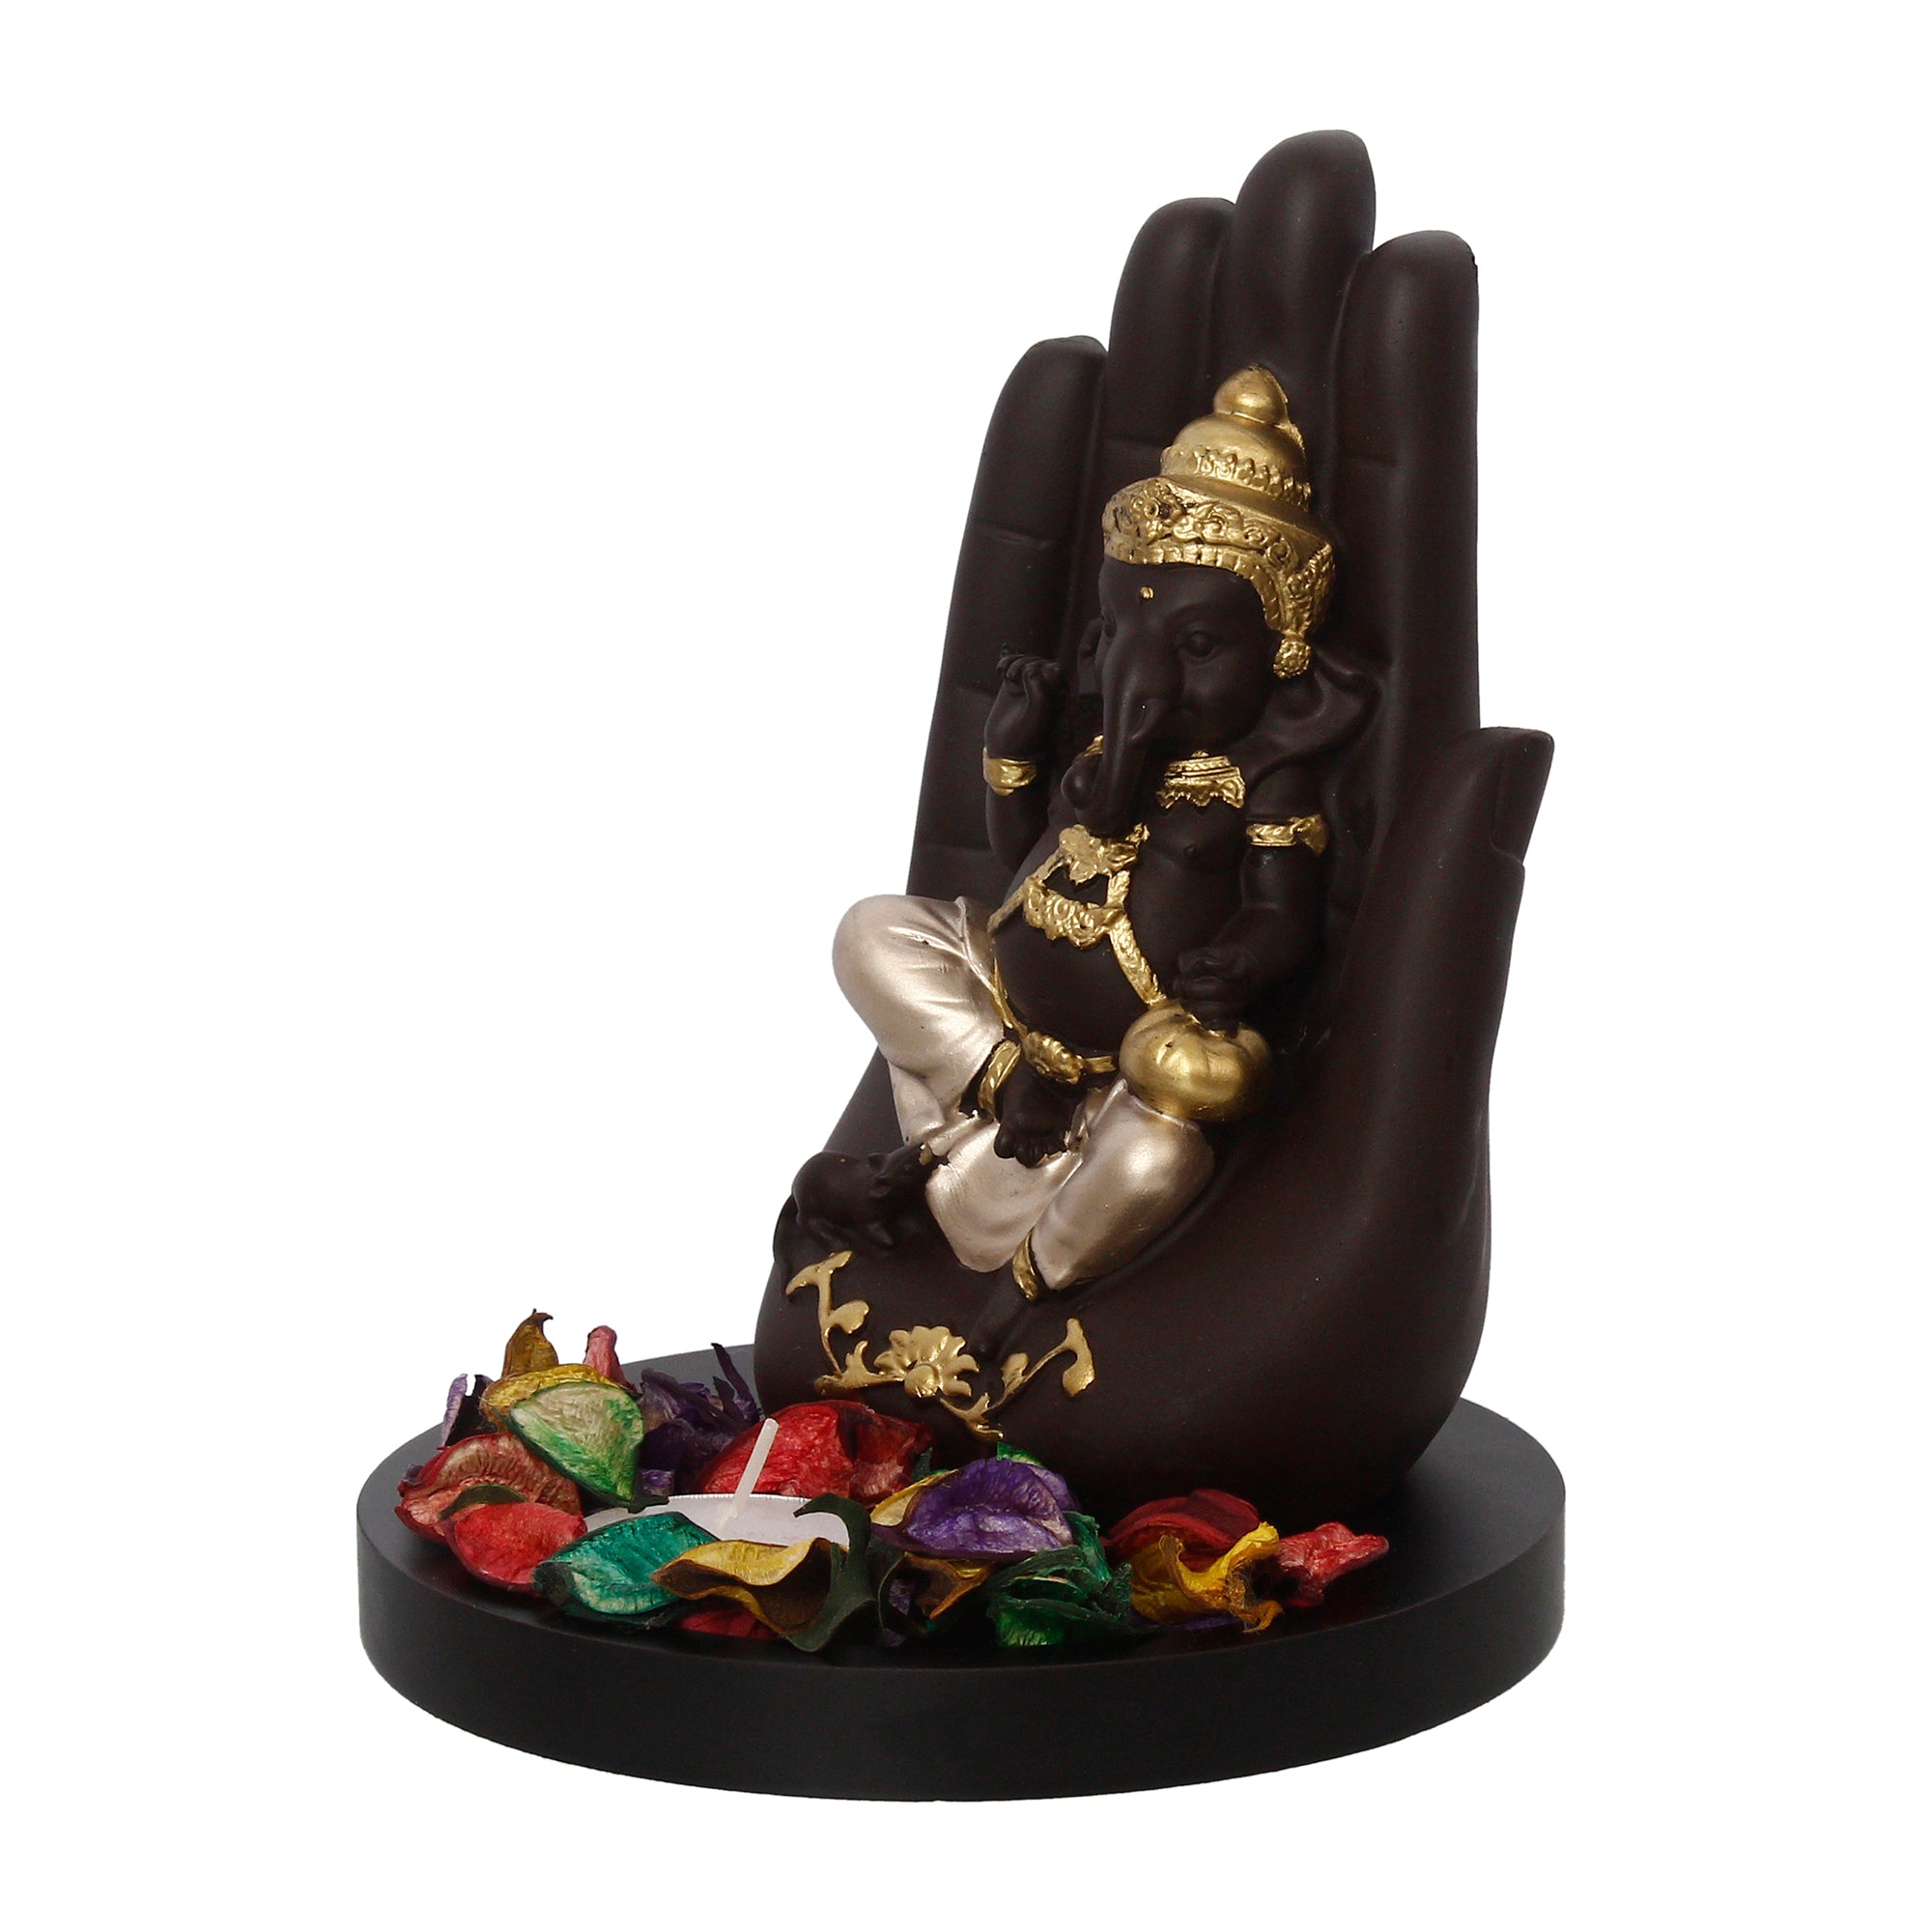 Golden and Black Handcrafted Palm Ganesha Idol on Wooden Base with Fragranced Petals Tealight Candle Holder 5